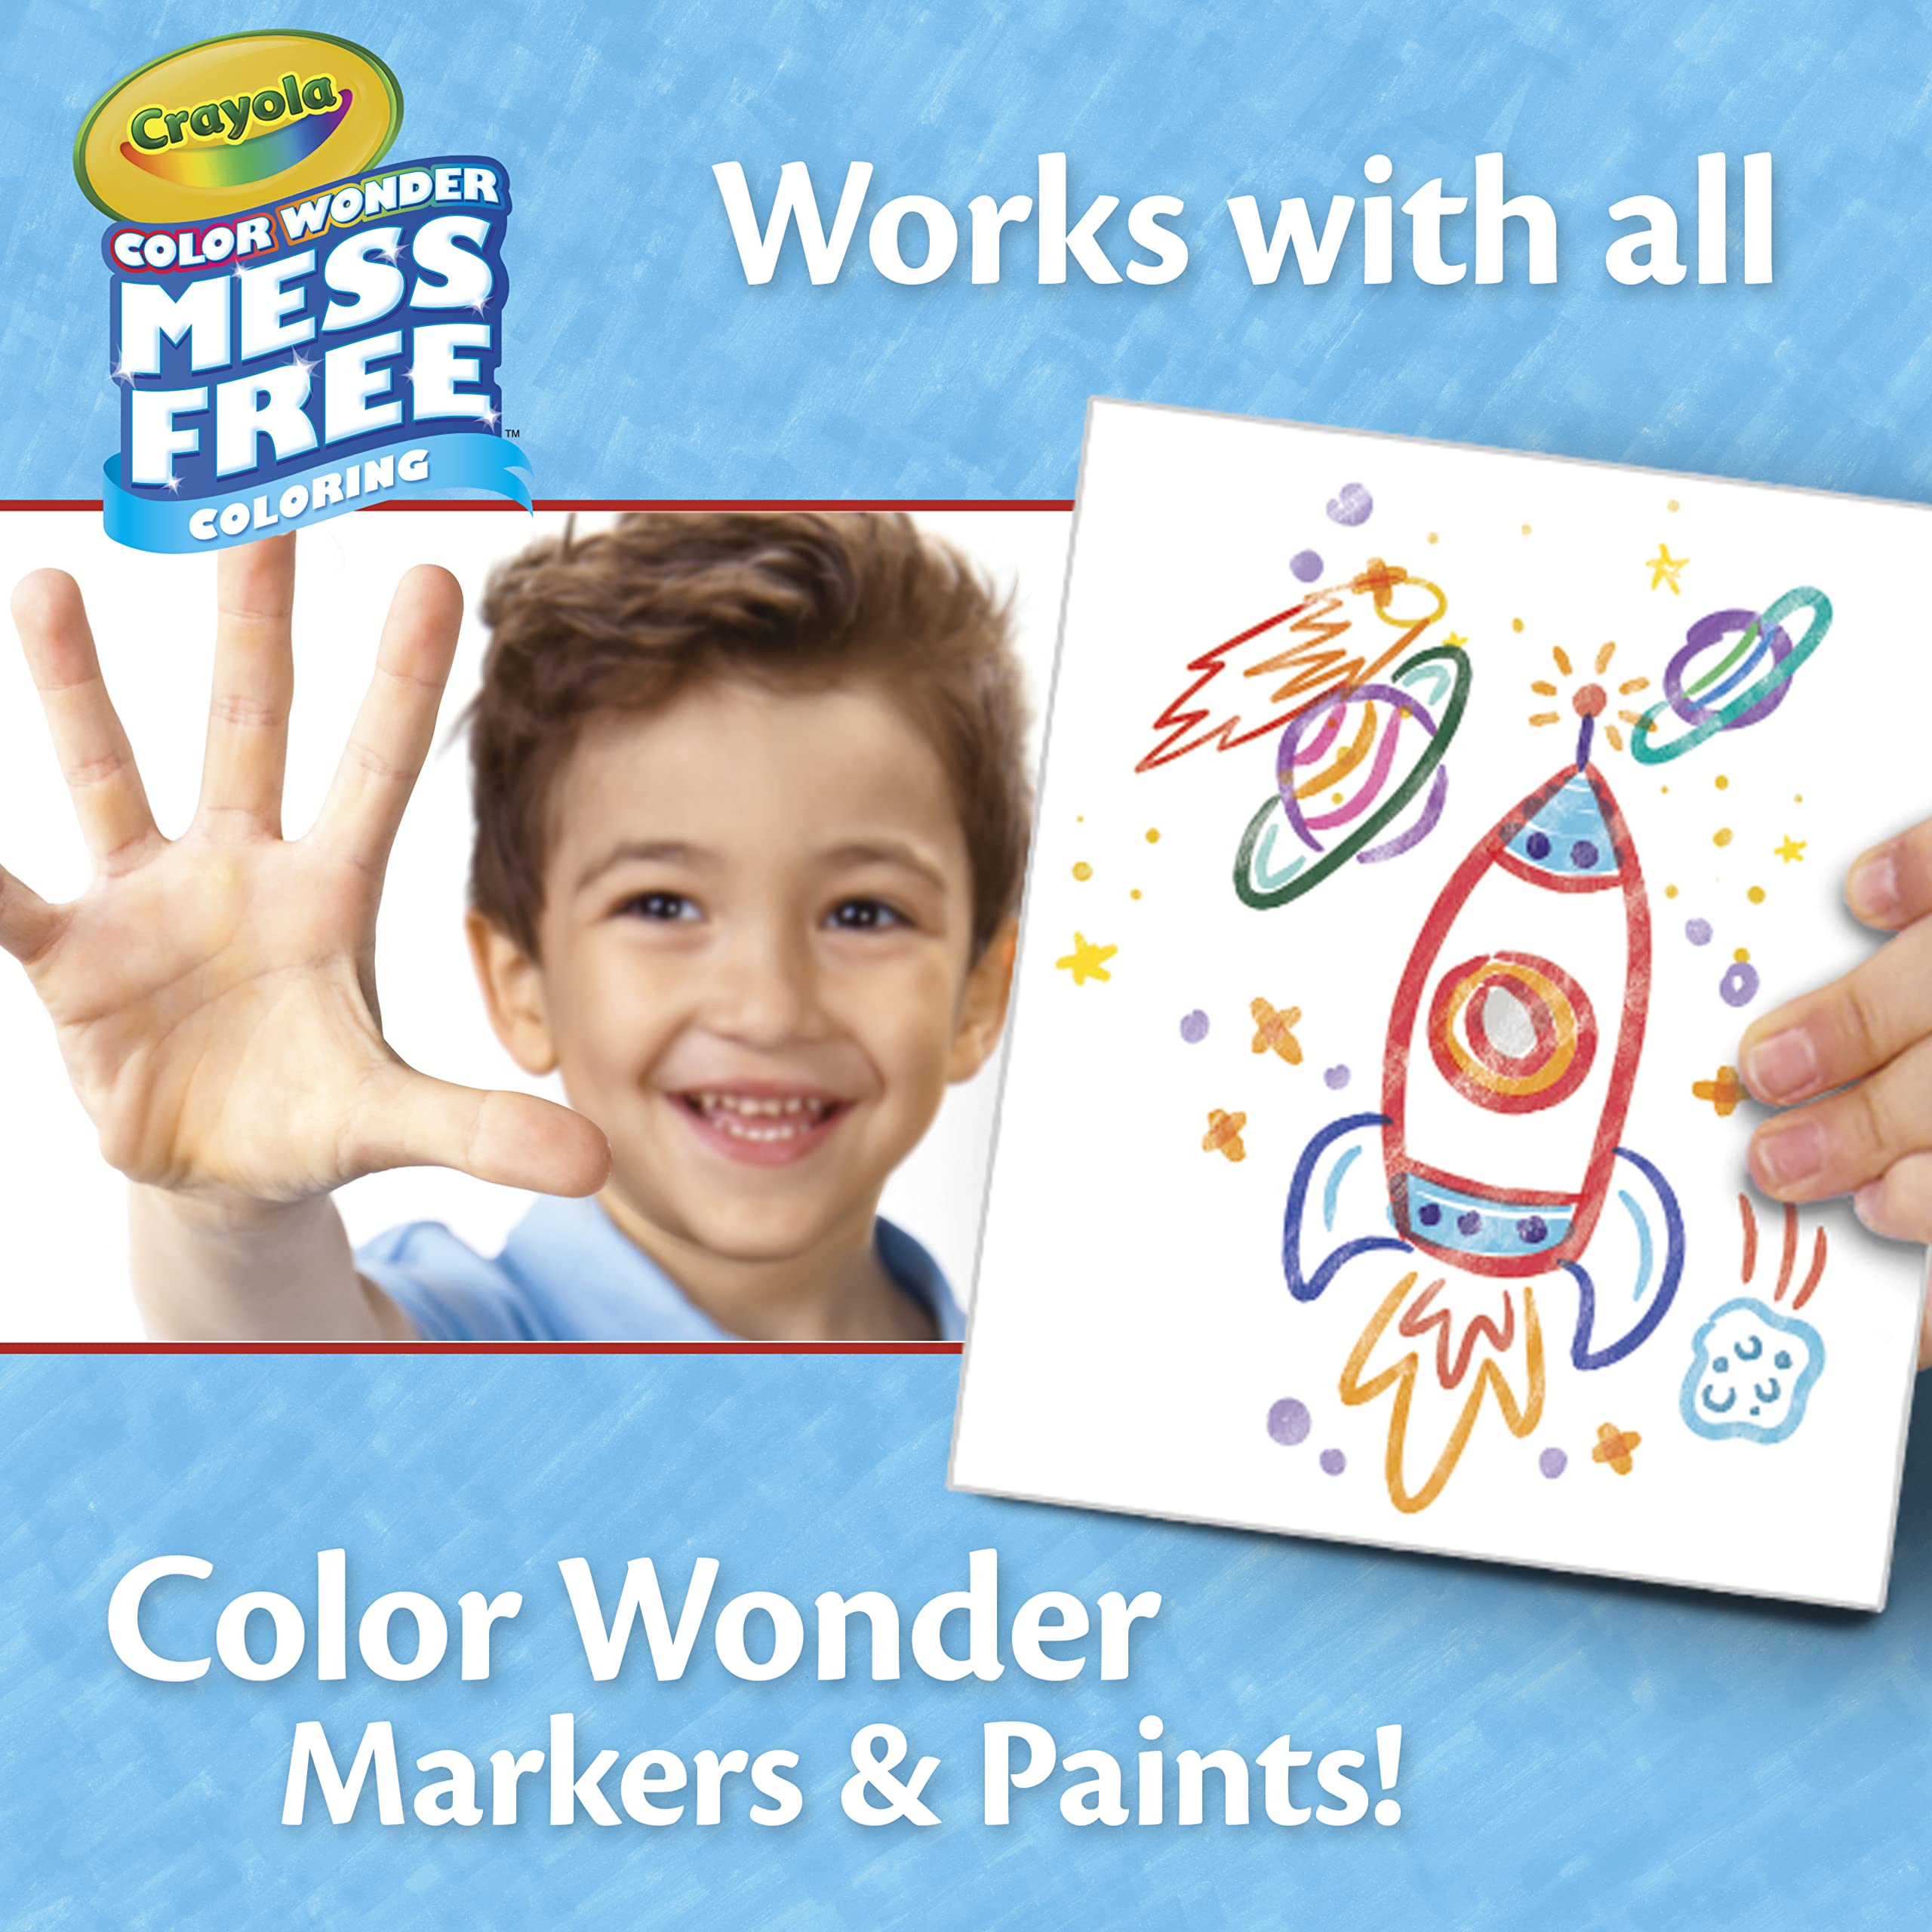 Crayola Color Wonder Mess Free Coloring, Blank Coloring Pages, 50 Count, Printable Page Refill Set